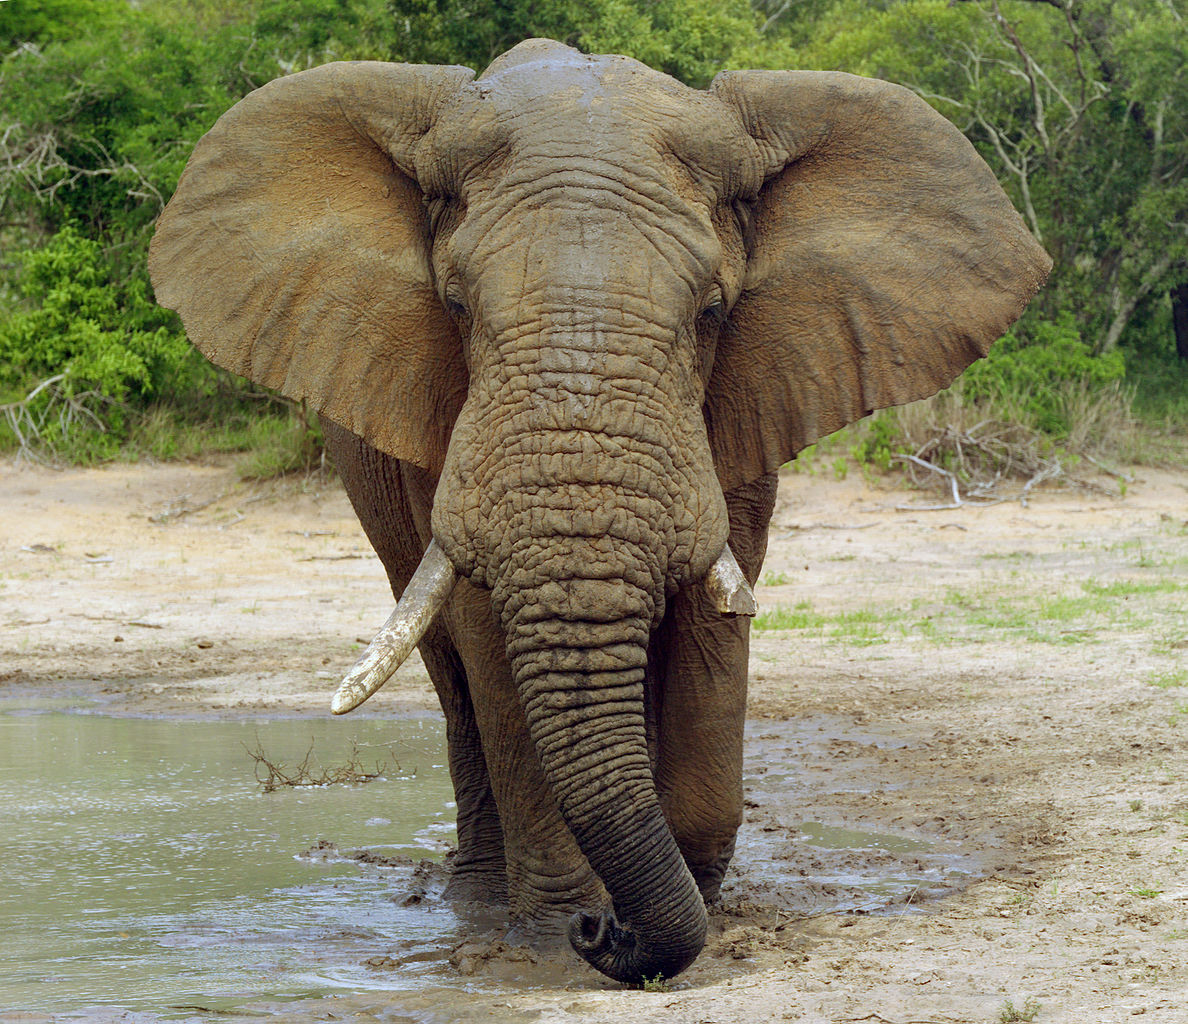 Found: A Gene That Prevents Elephants From Getting Cancer